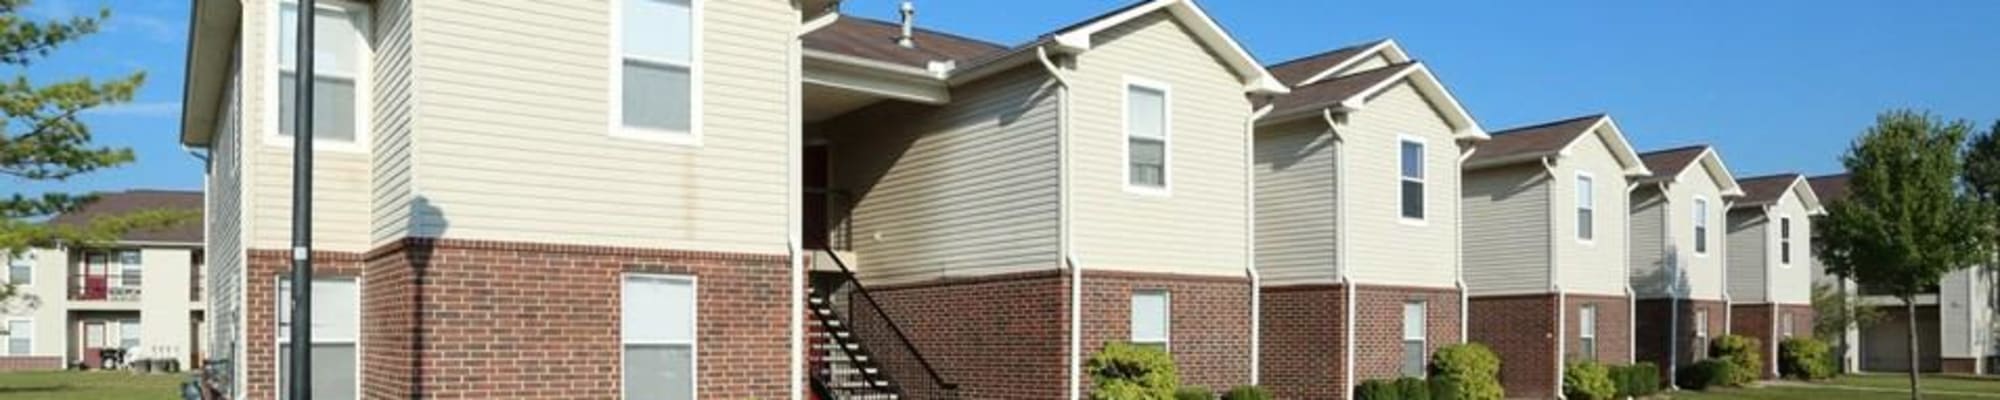 Accessibility Statement | Cameron Creek Apartments in Galloway, Ohio 